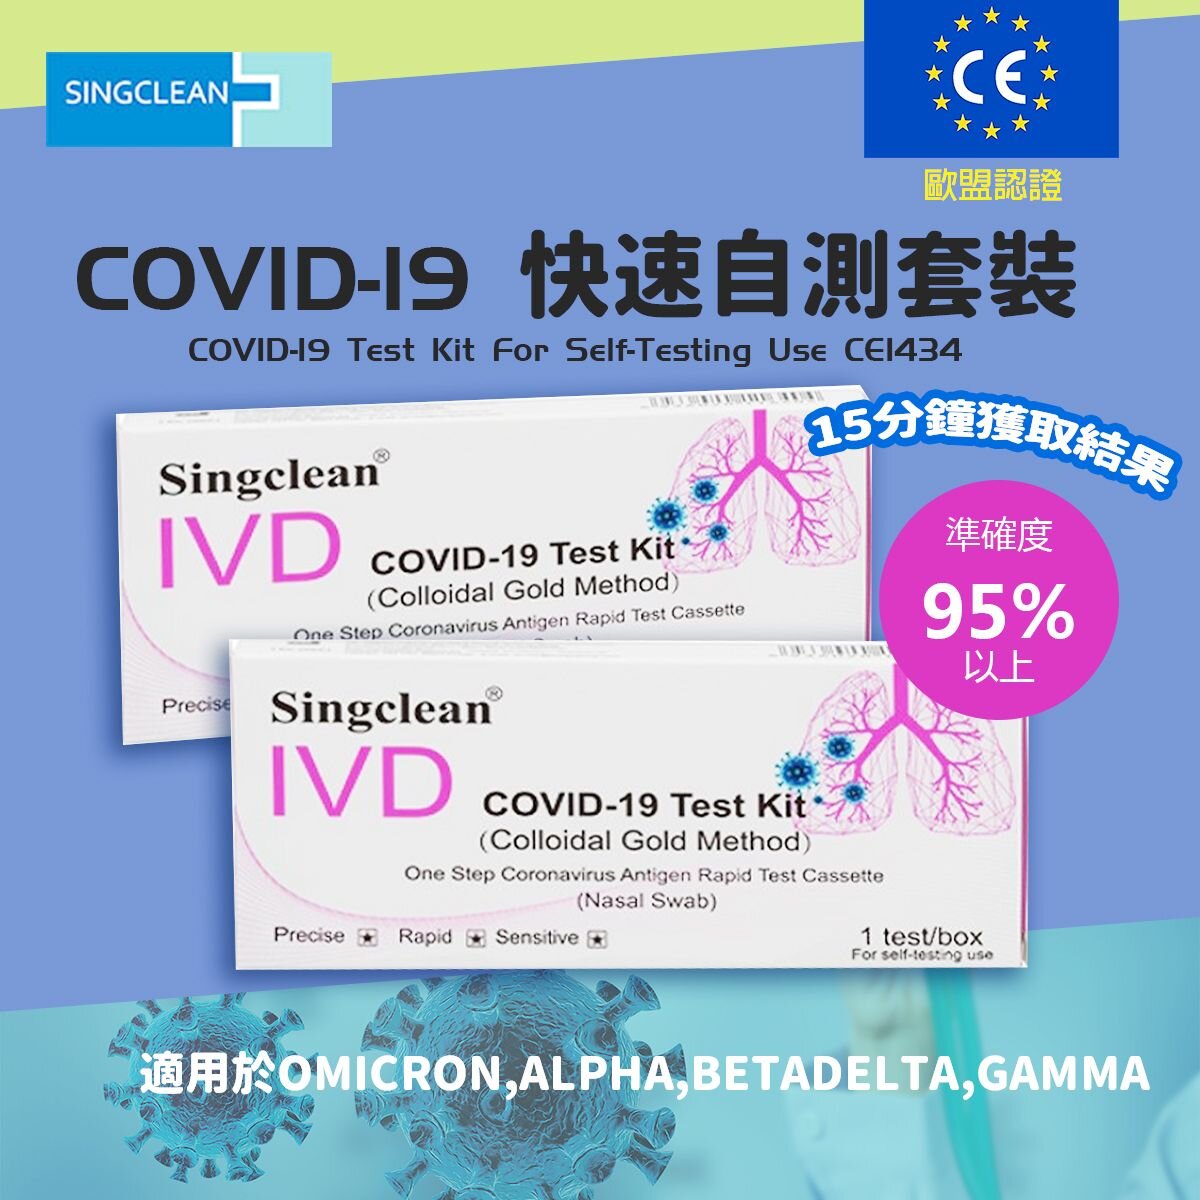 Singclean COVID-19 Test Kit For Self-Testing Use CE1434